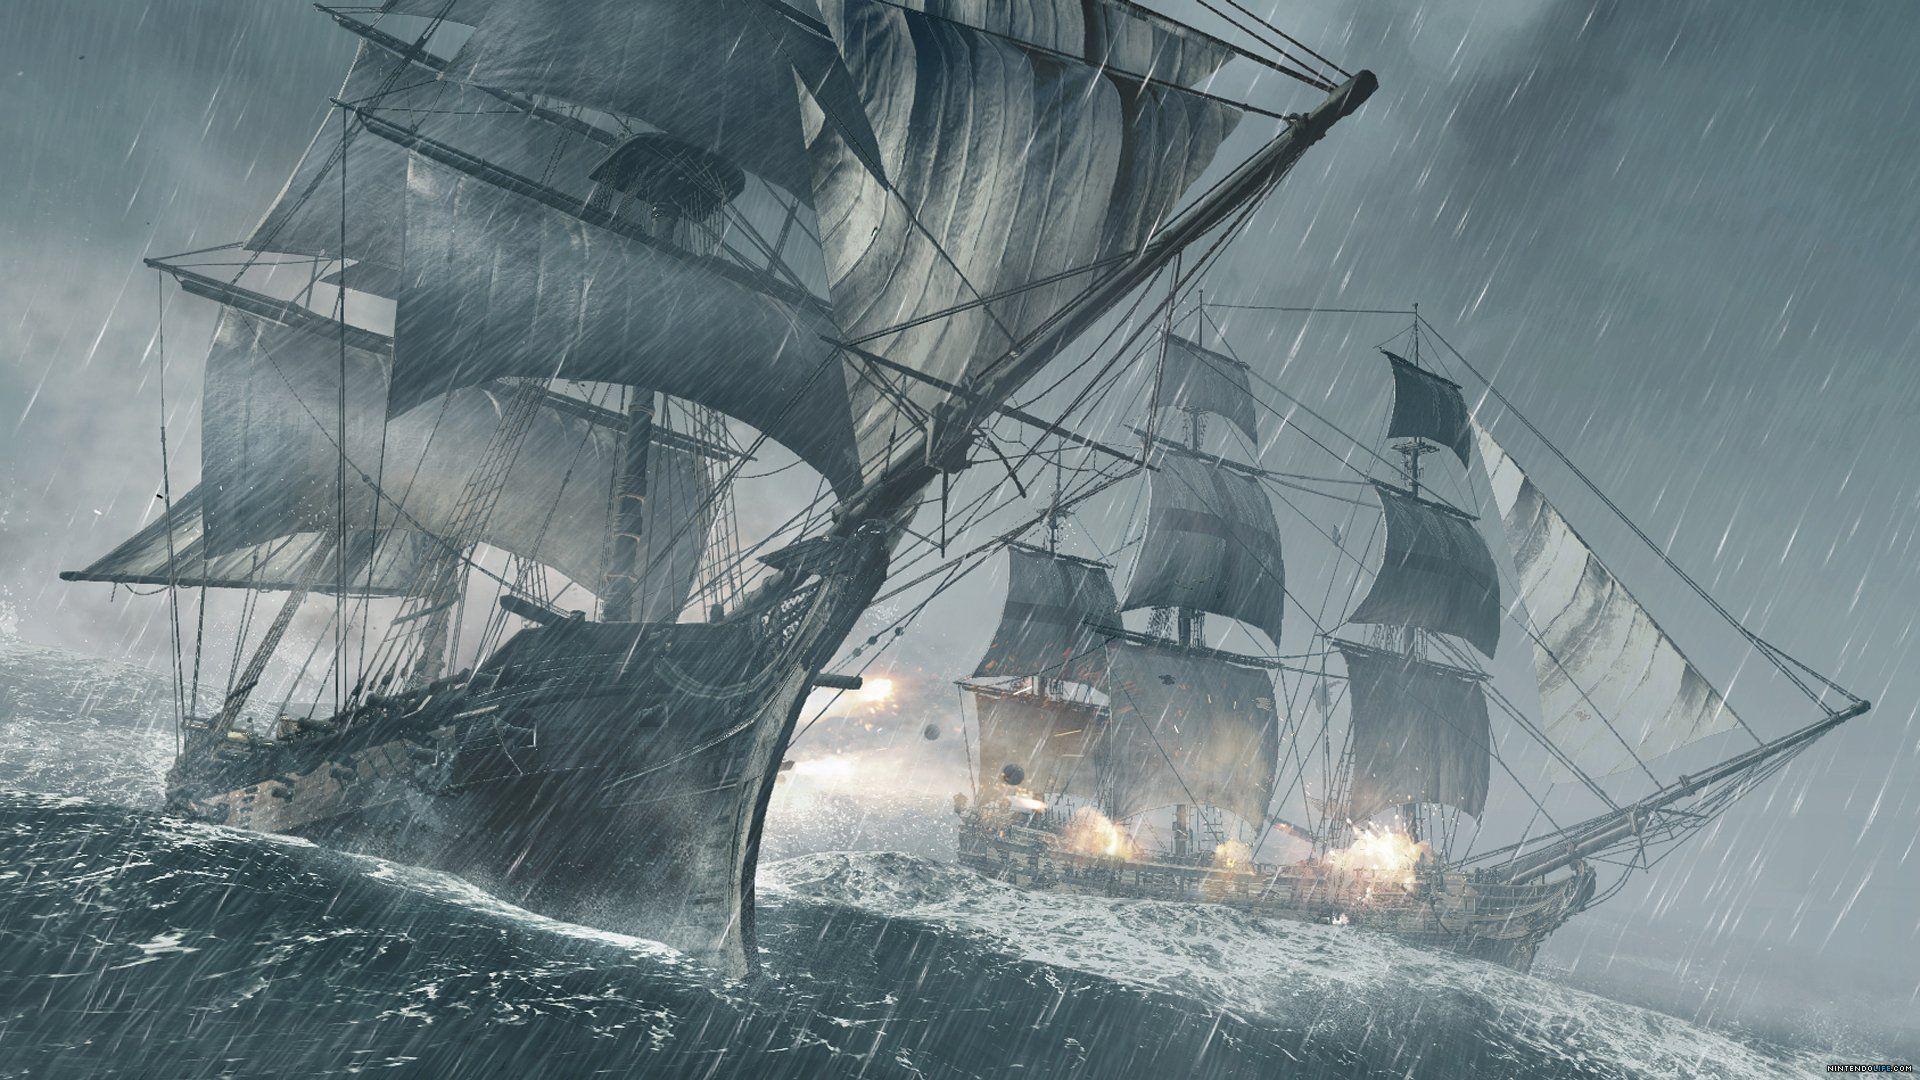 Assassin&;s Creed IV Black Flag Release Dates and Details are